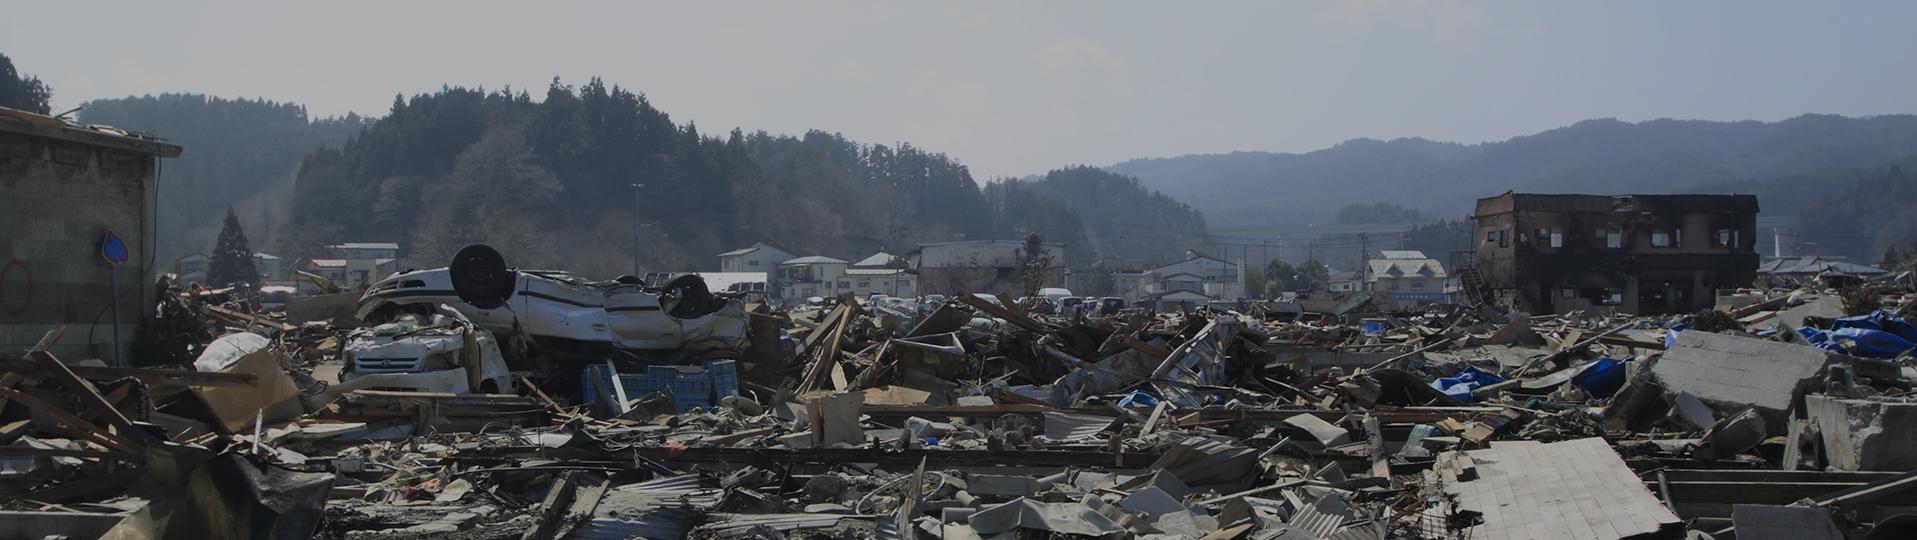 Aftermath of a natural disaster, emphasizing the urgency of humanitarian relief programs like TPS.